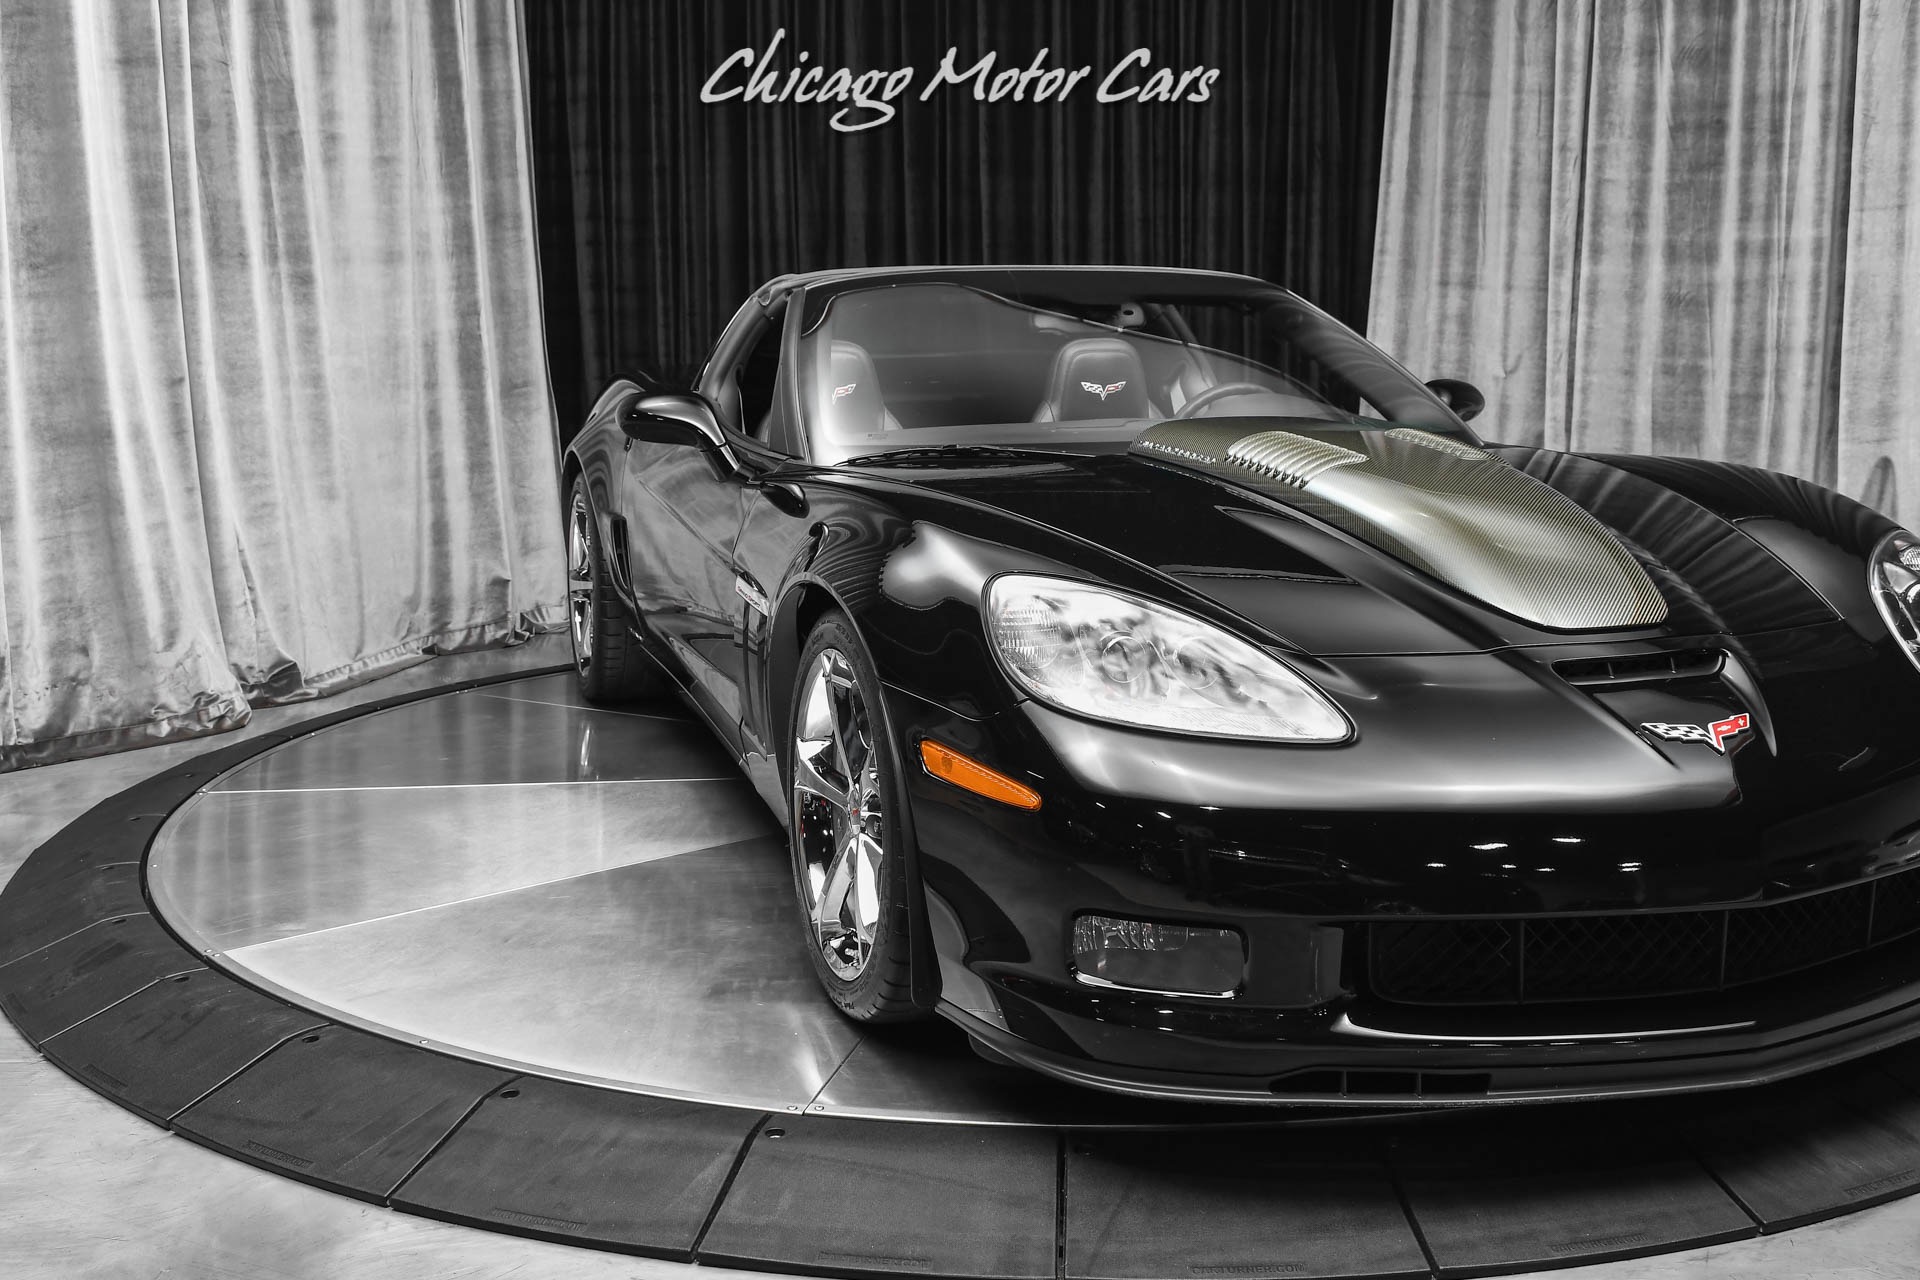 Used-2011-Chevrolet-Corvette-Z16-Grand-Sport-3LT-Coupe-CALLAWAY-SC606-Package-Only-10K-Miles